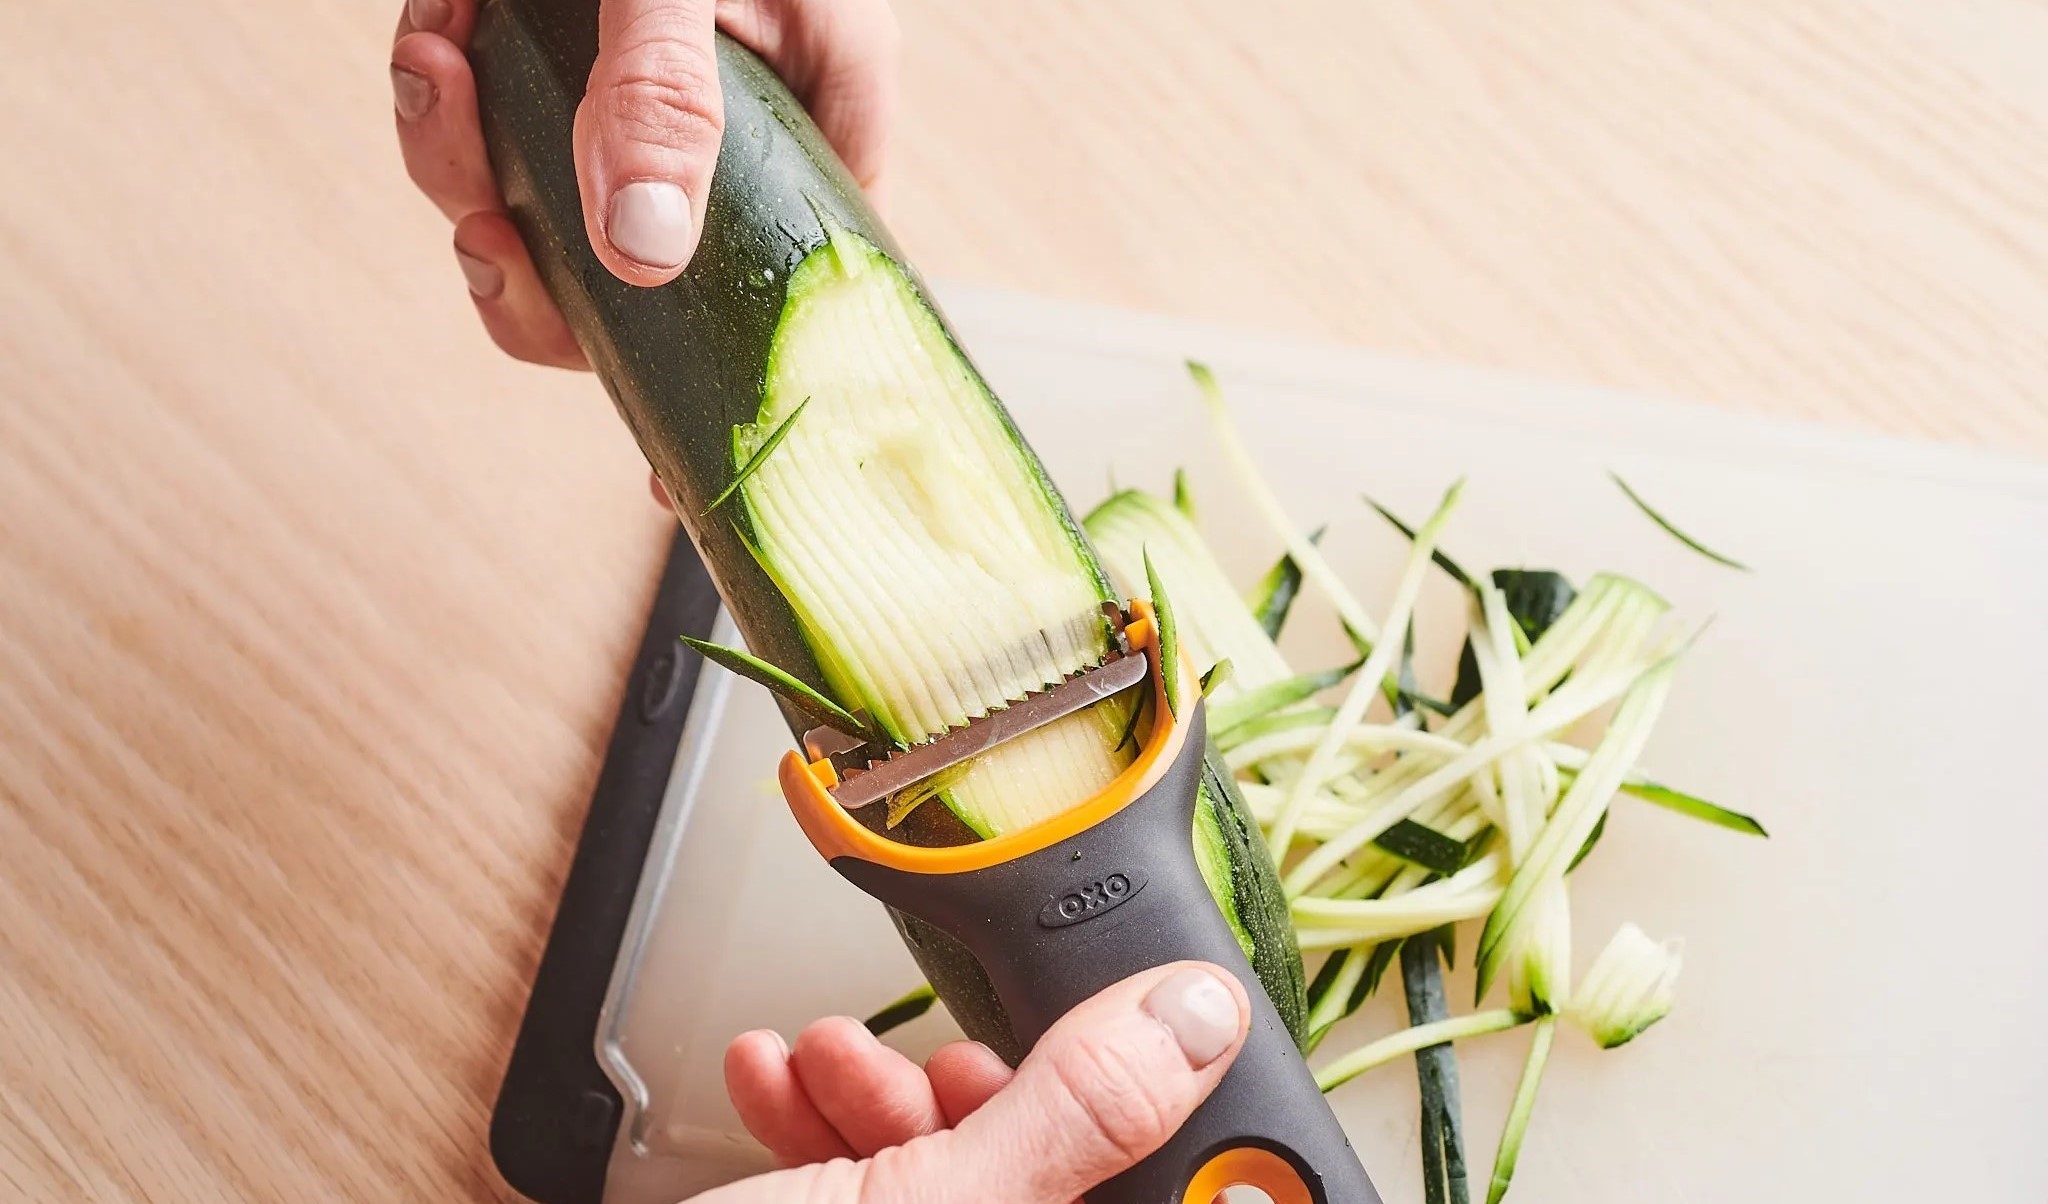 The Trick To Sharpening Your Vegetable Peelers Without Any Special Tools